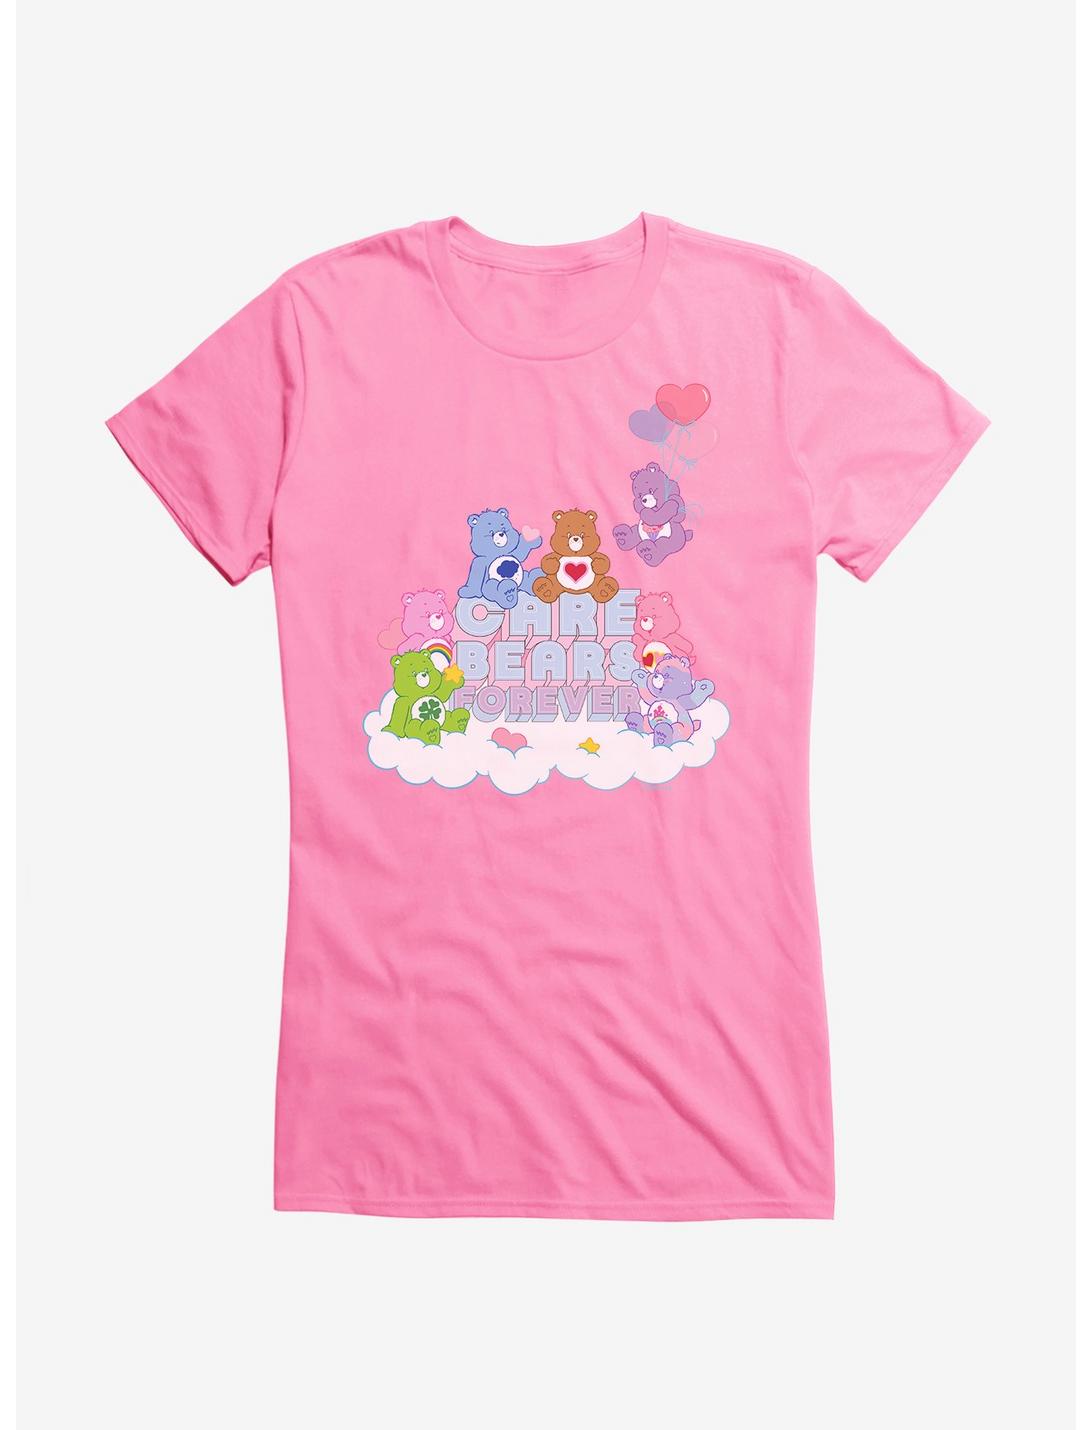 Care Bears Forever Girls T-Shirt, CHARITY PINK, hi-res